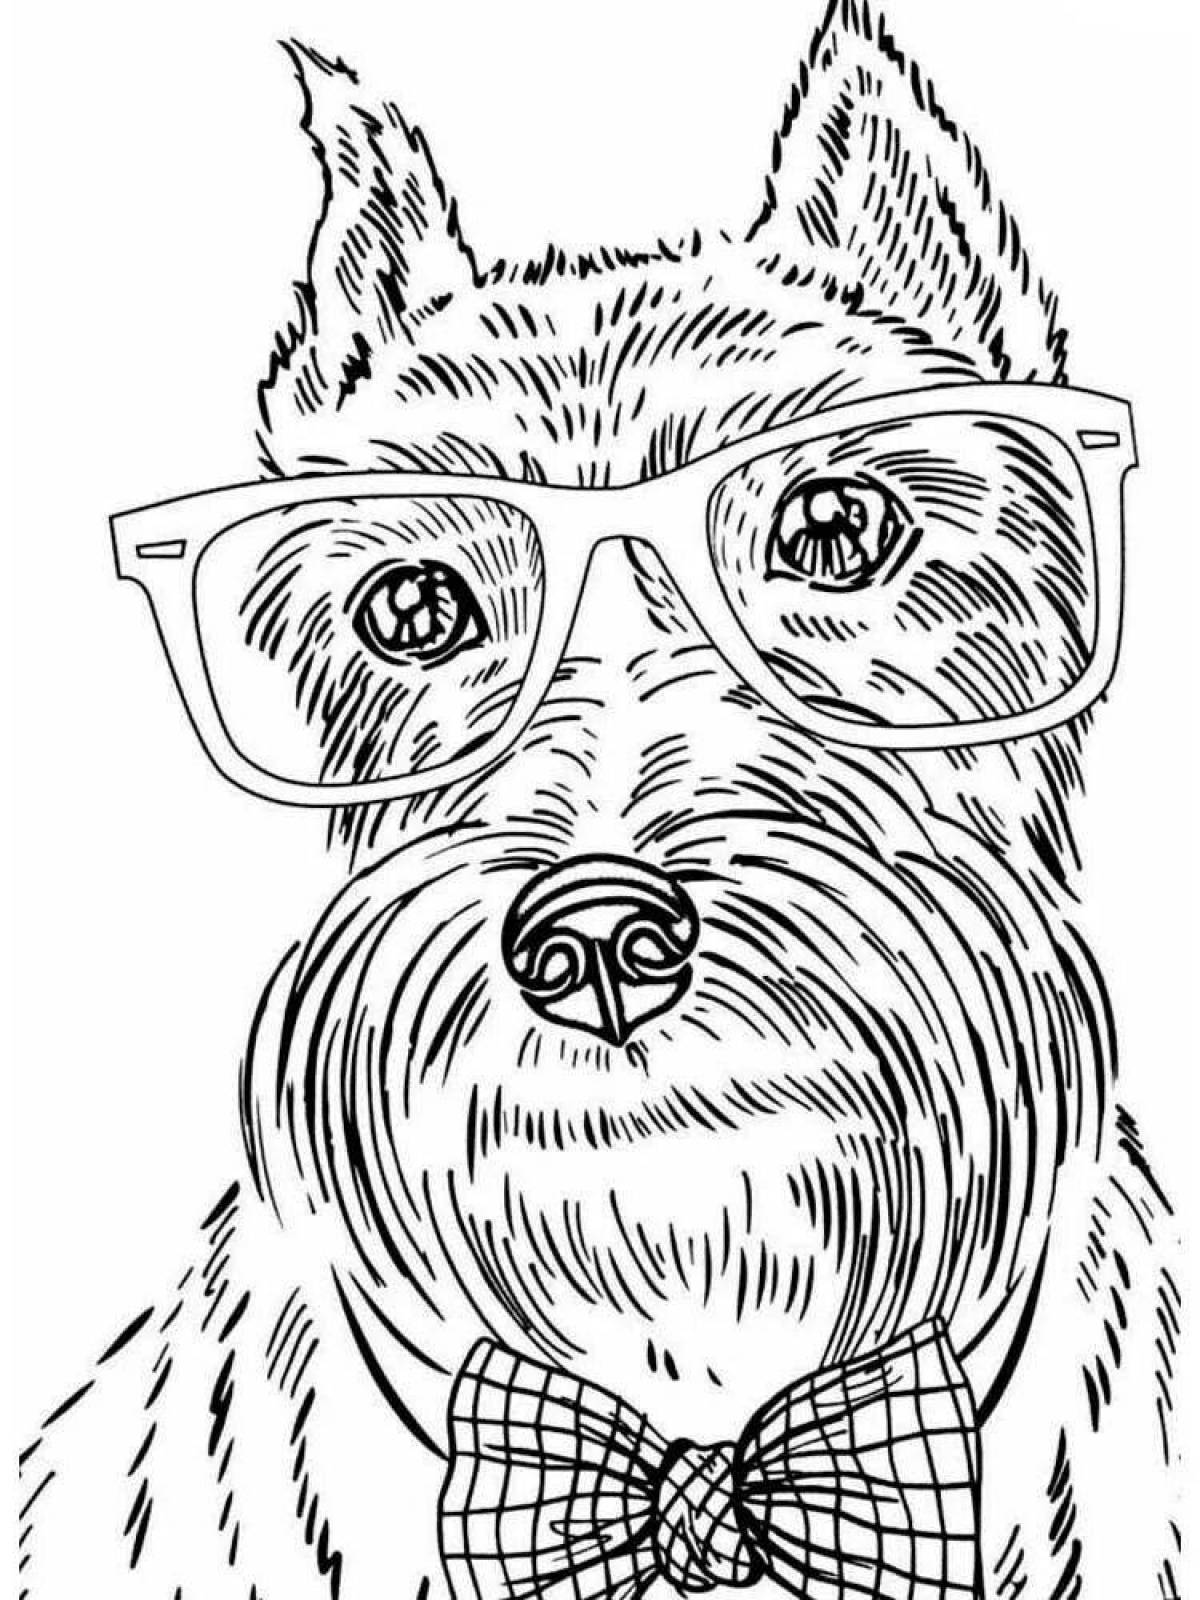 Energetic coloring pages of dogs for adults